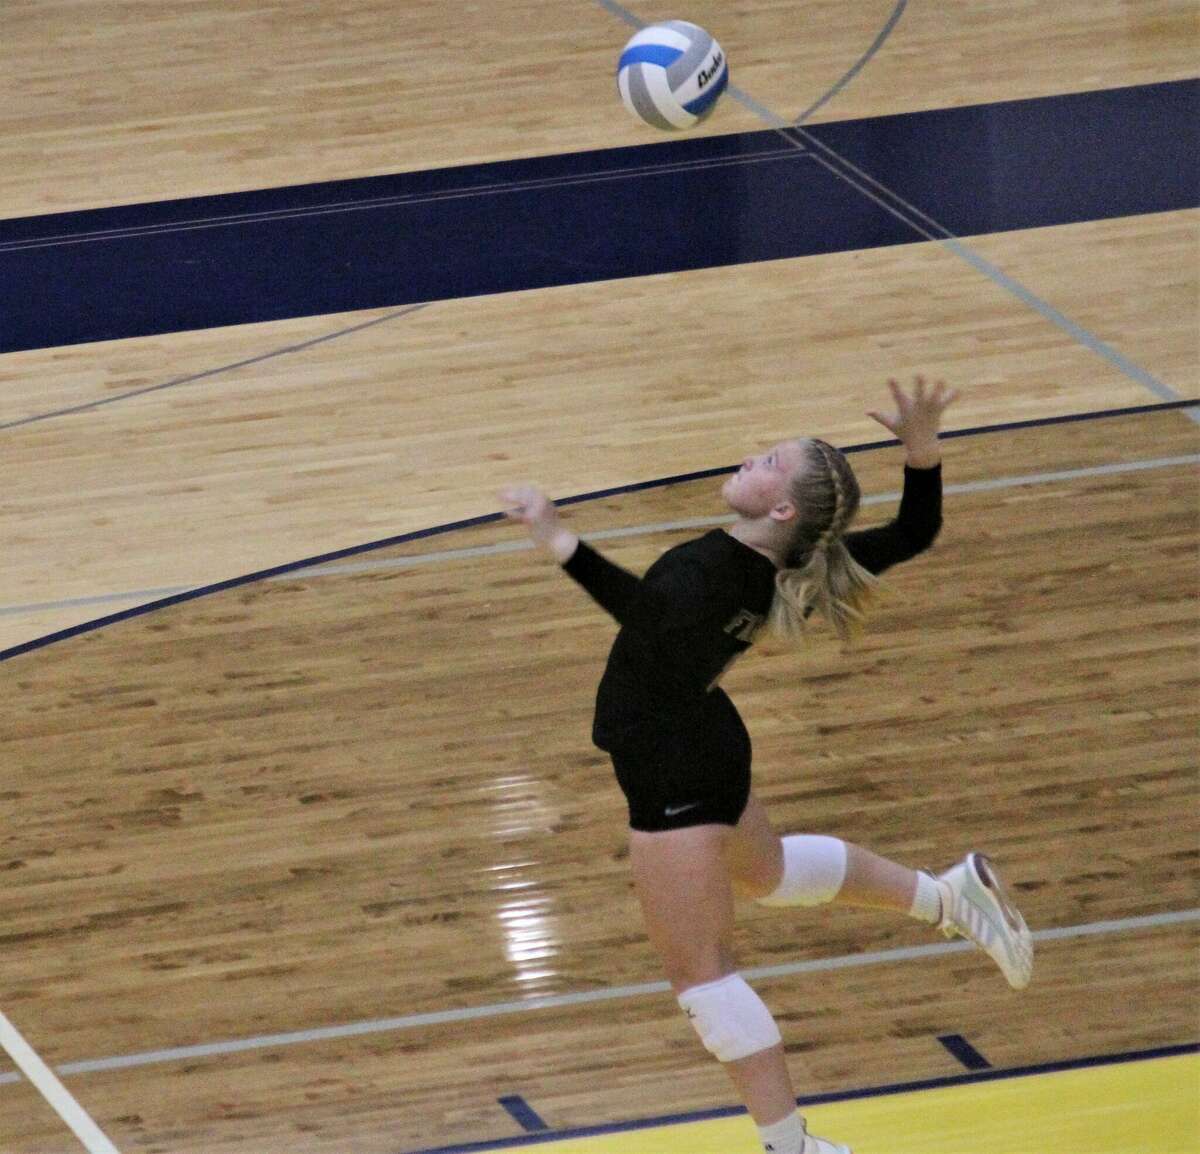 Frankfort senior Kinzee Stockdale braces to serve during a match against Manistee on Sep. 1 at Manistee High School.